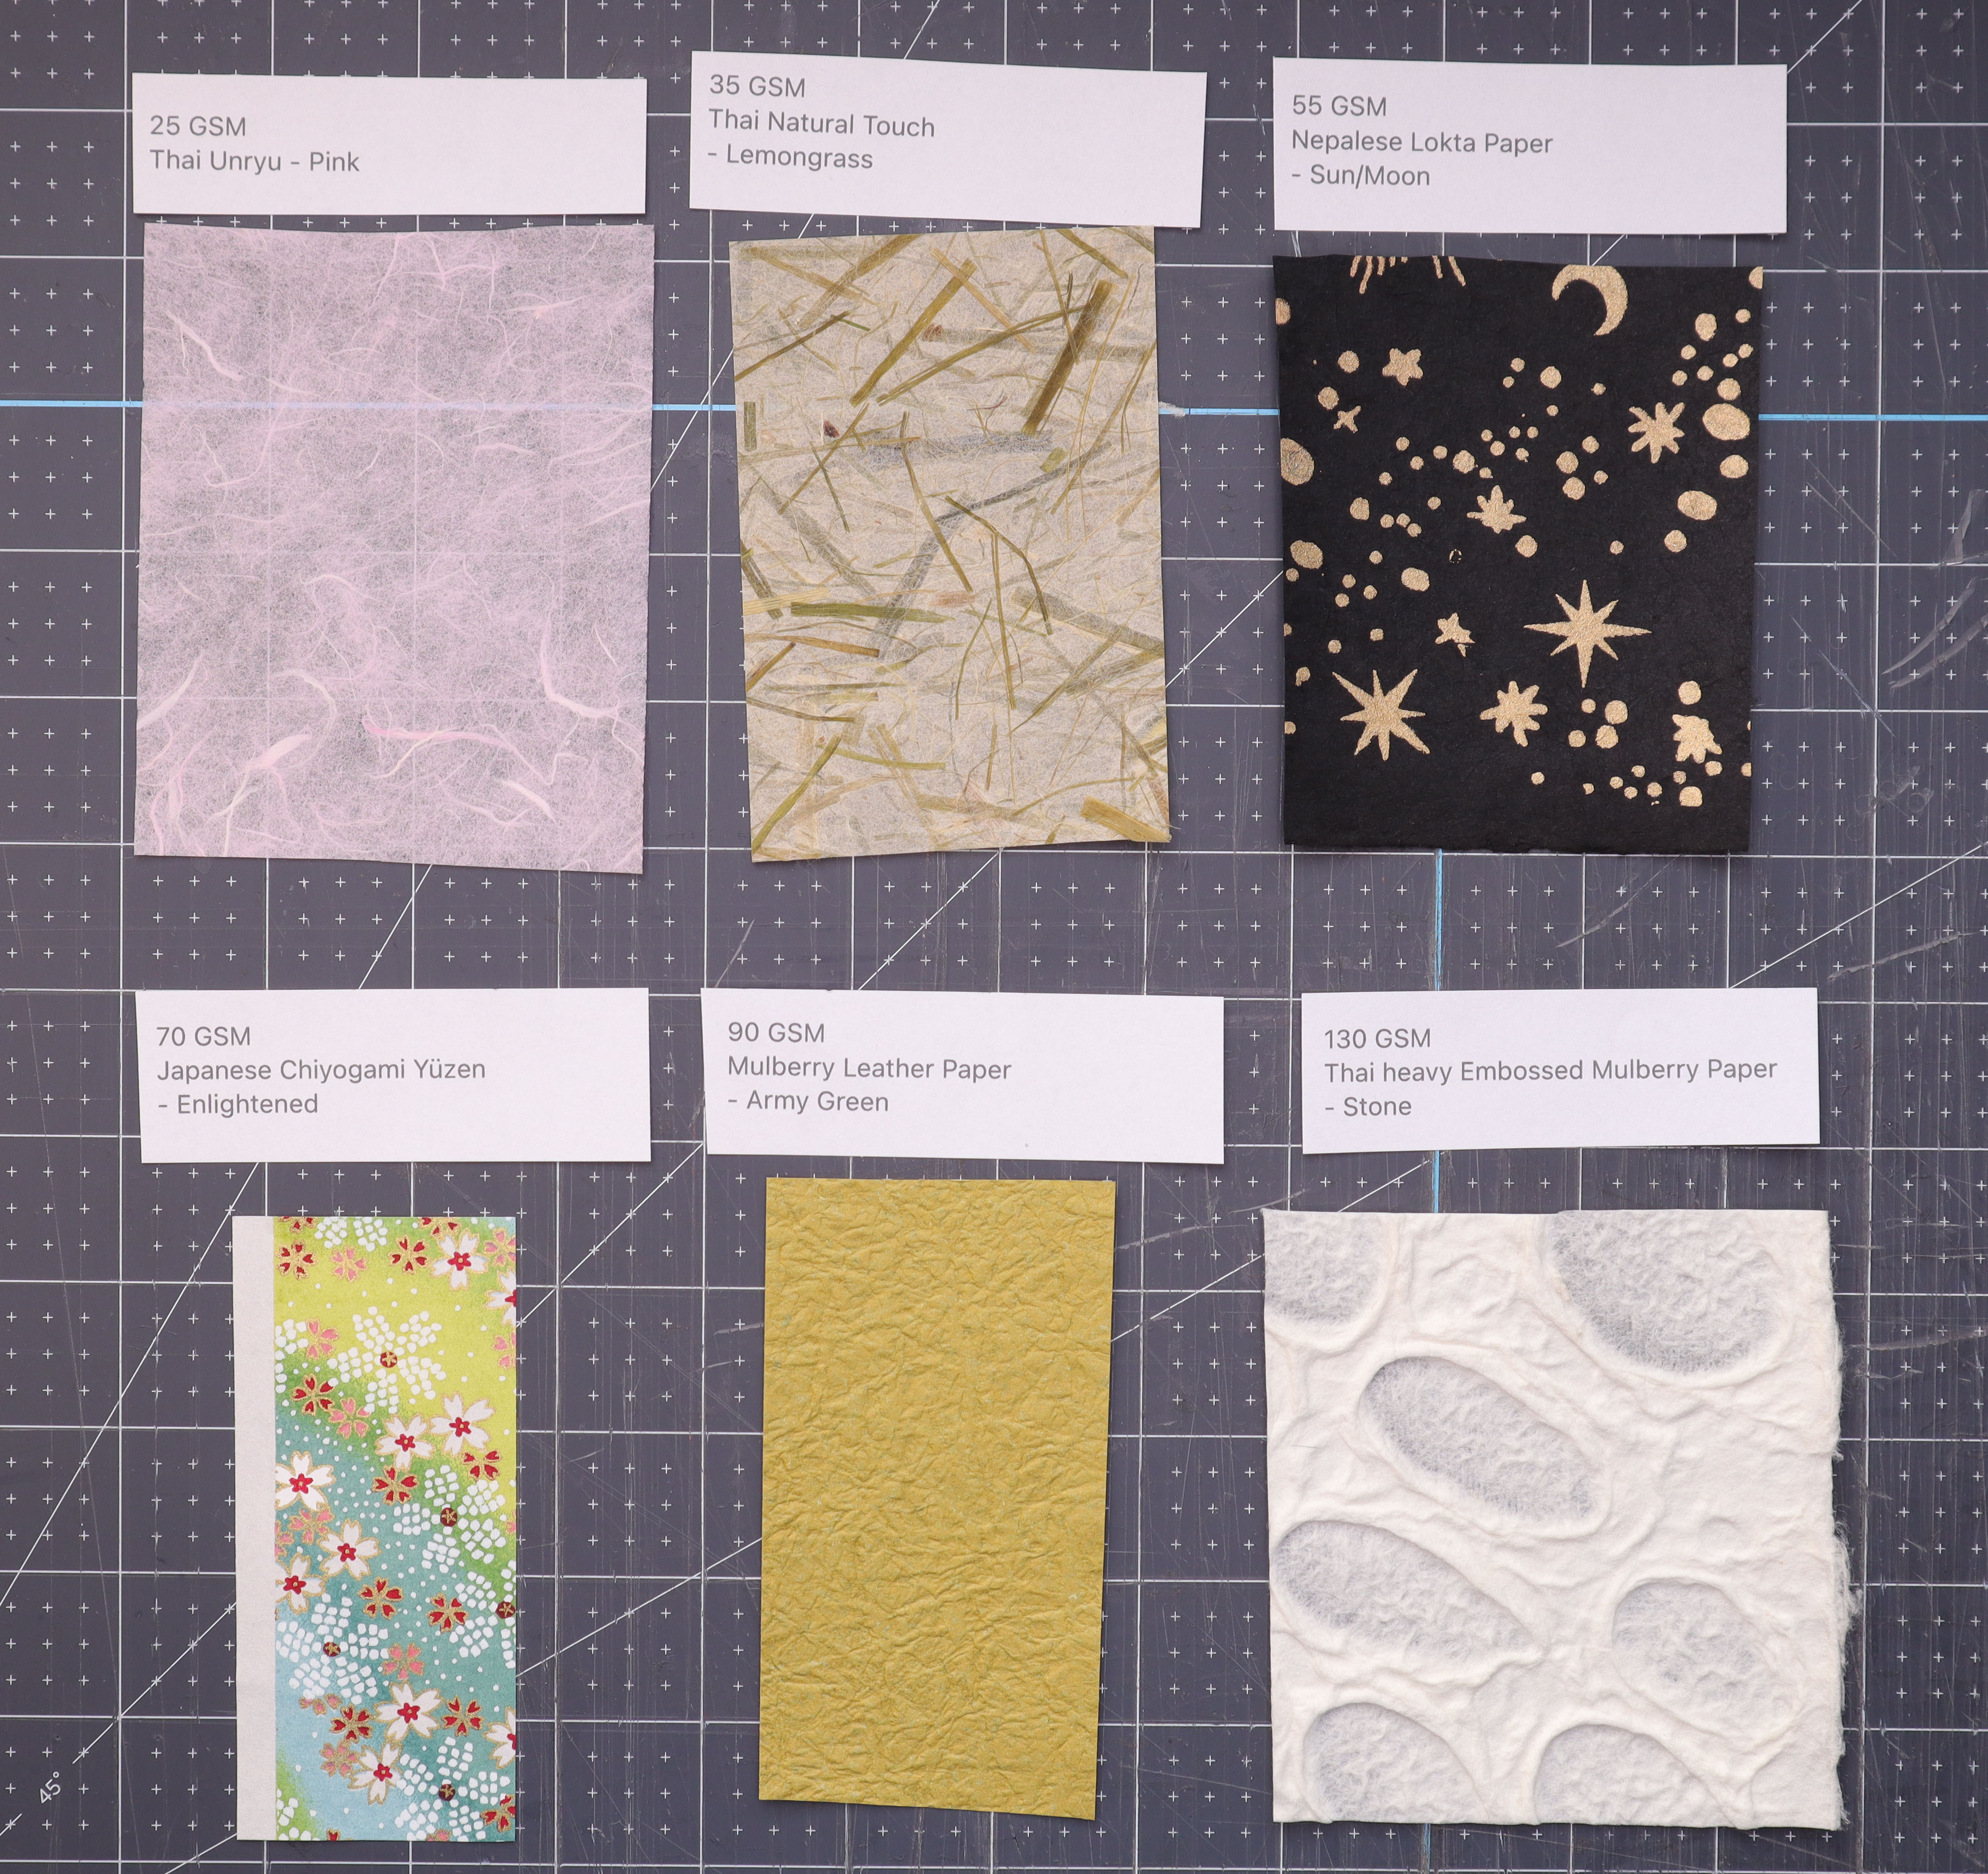 image showing 6 sample sheet of paper ranging in various thickness gsm from 25 to 130 which were used for this experiment and test